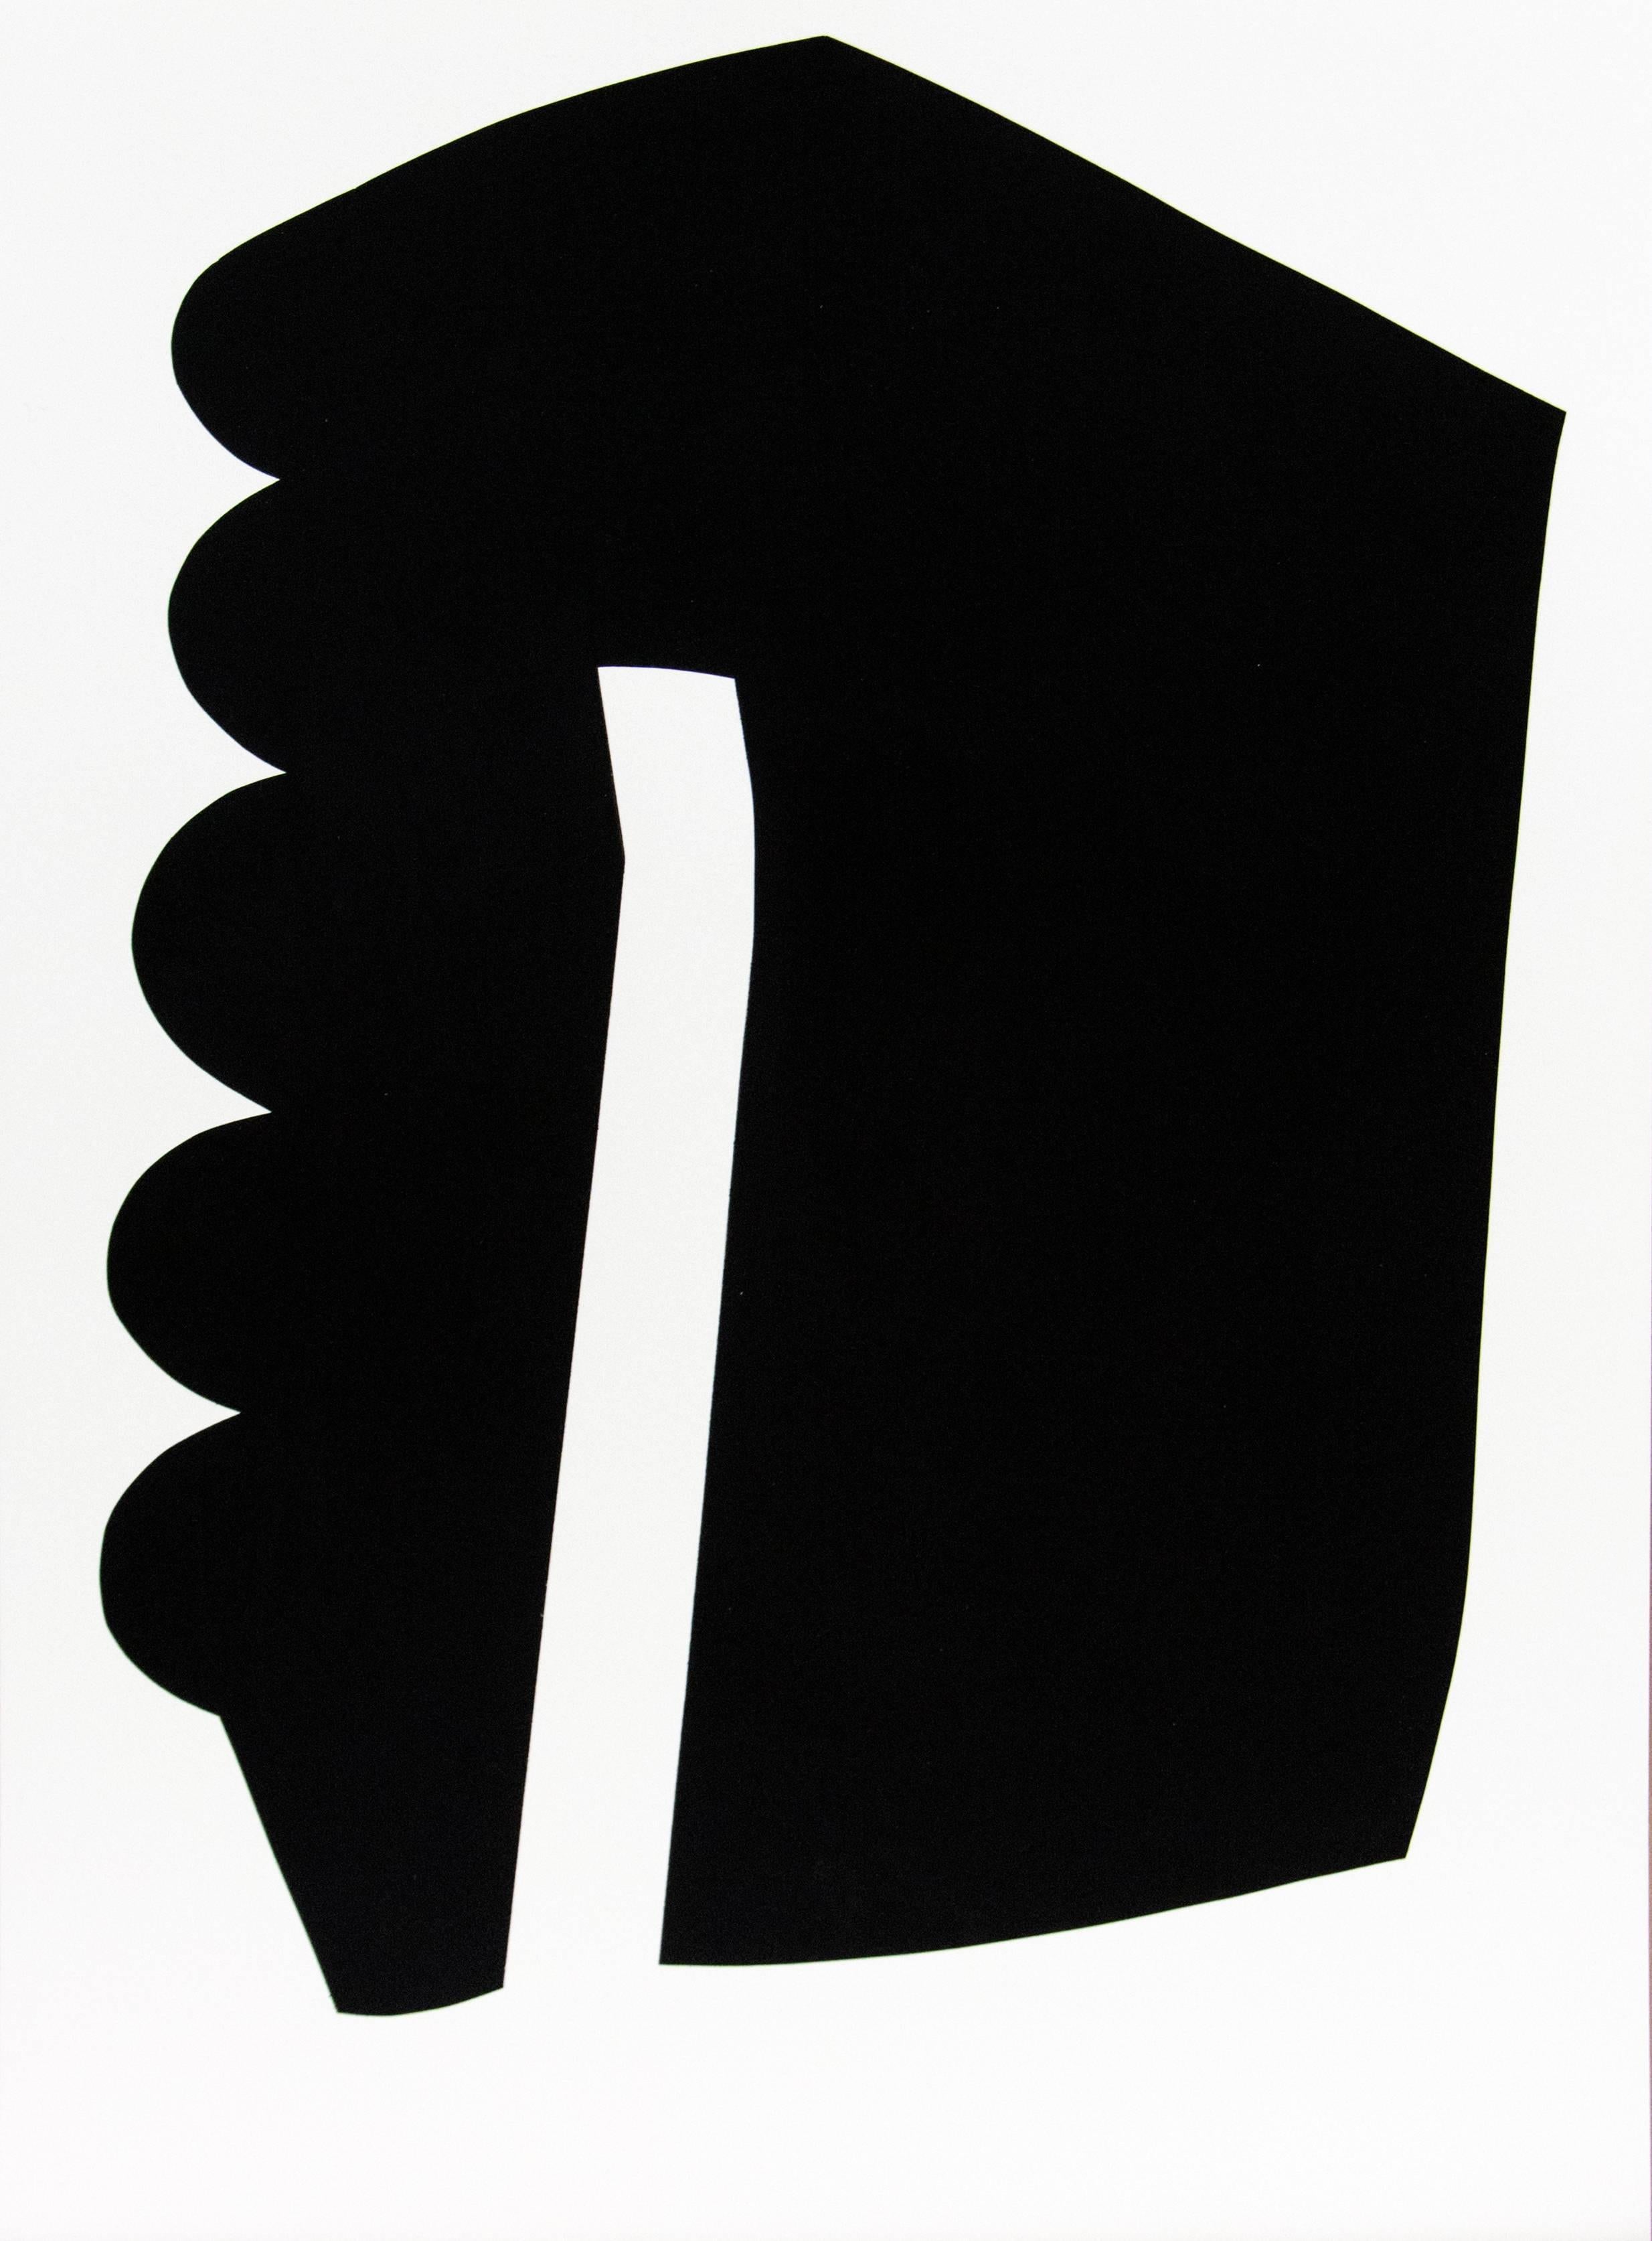 Scalloped Edge with One Line: Black and White Series - Painting by Aron Hill